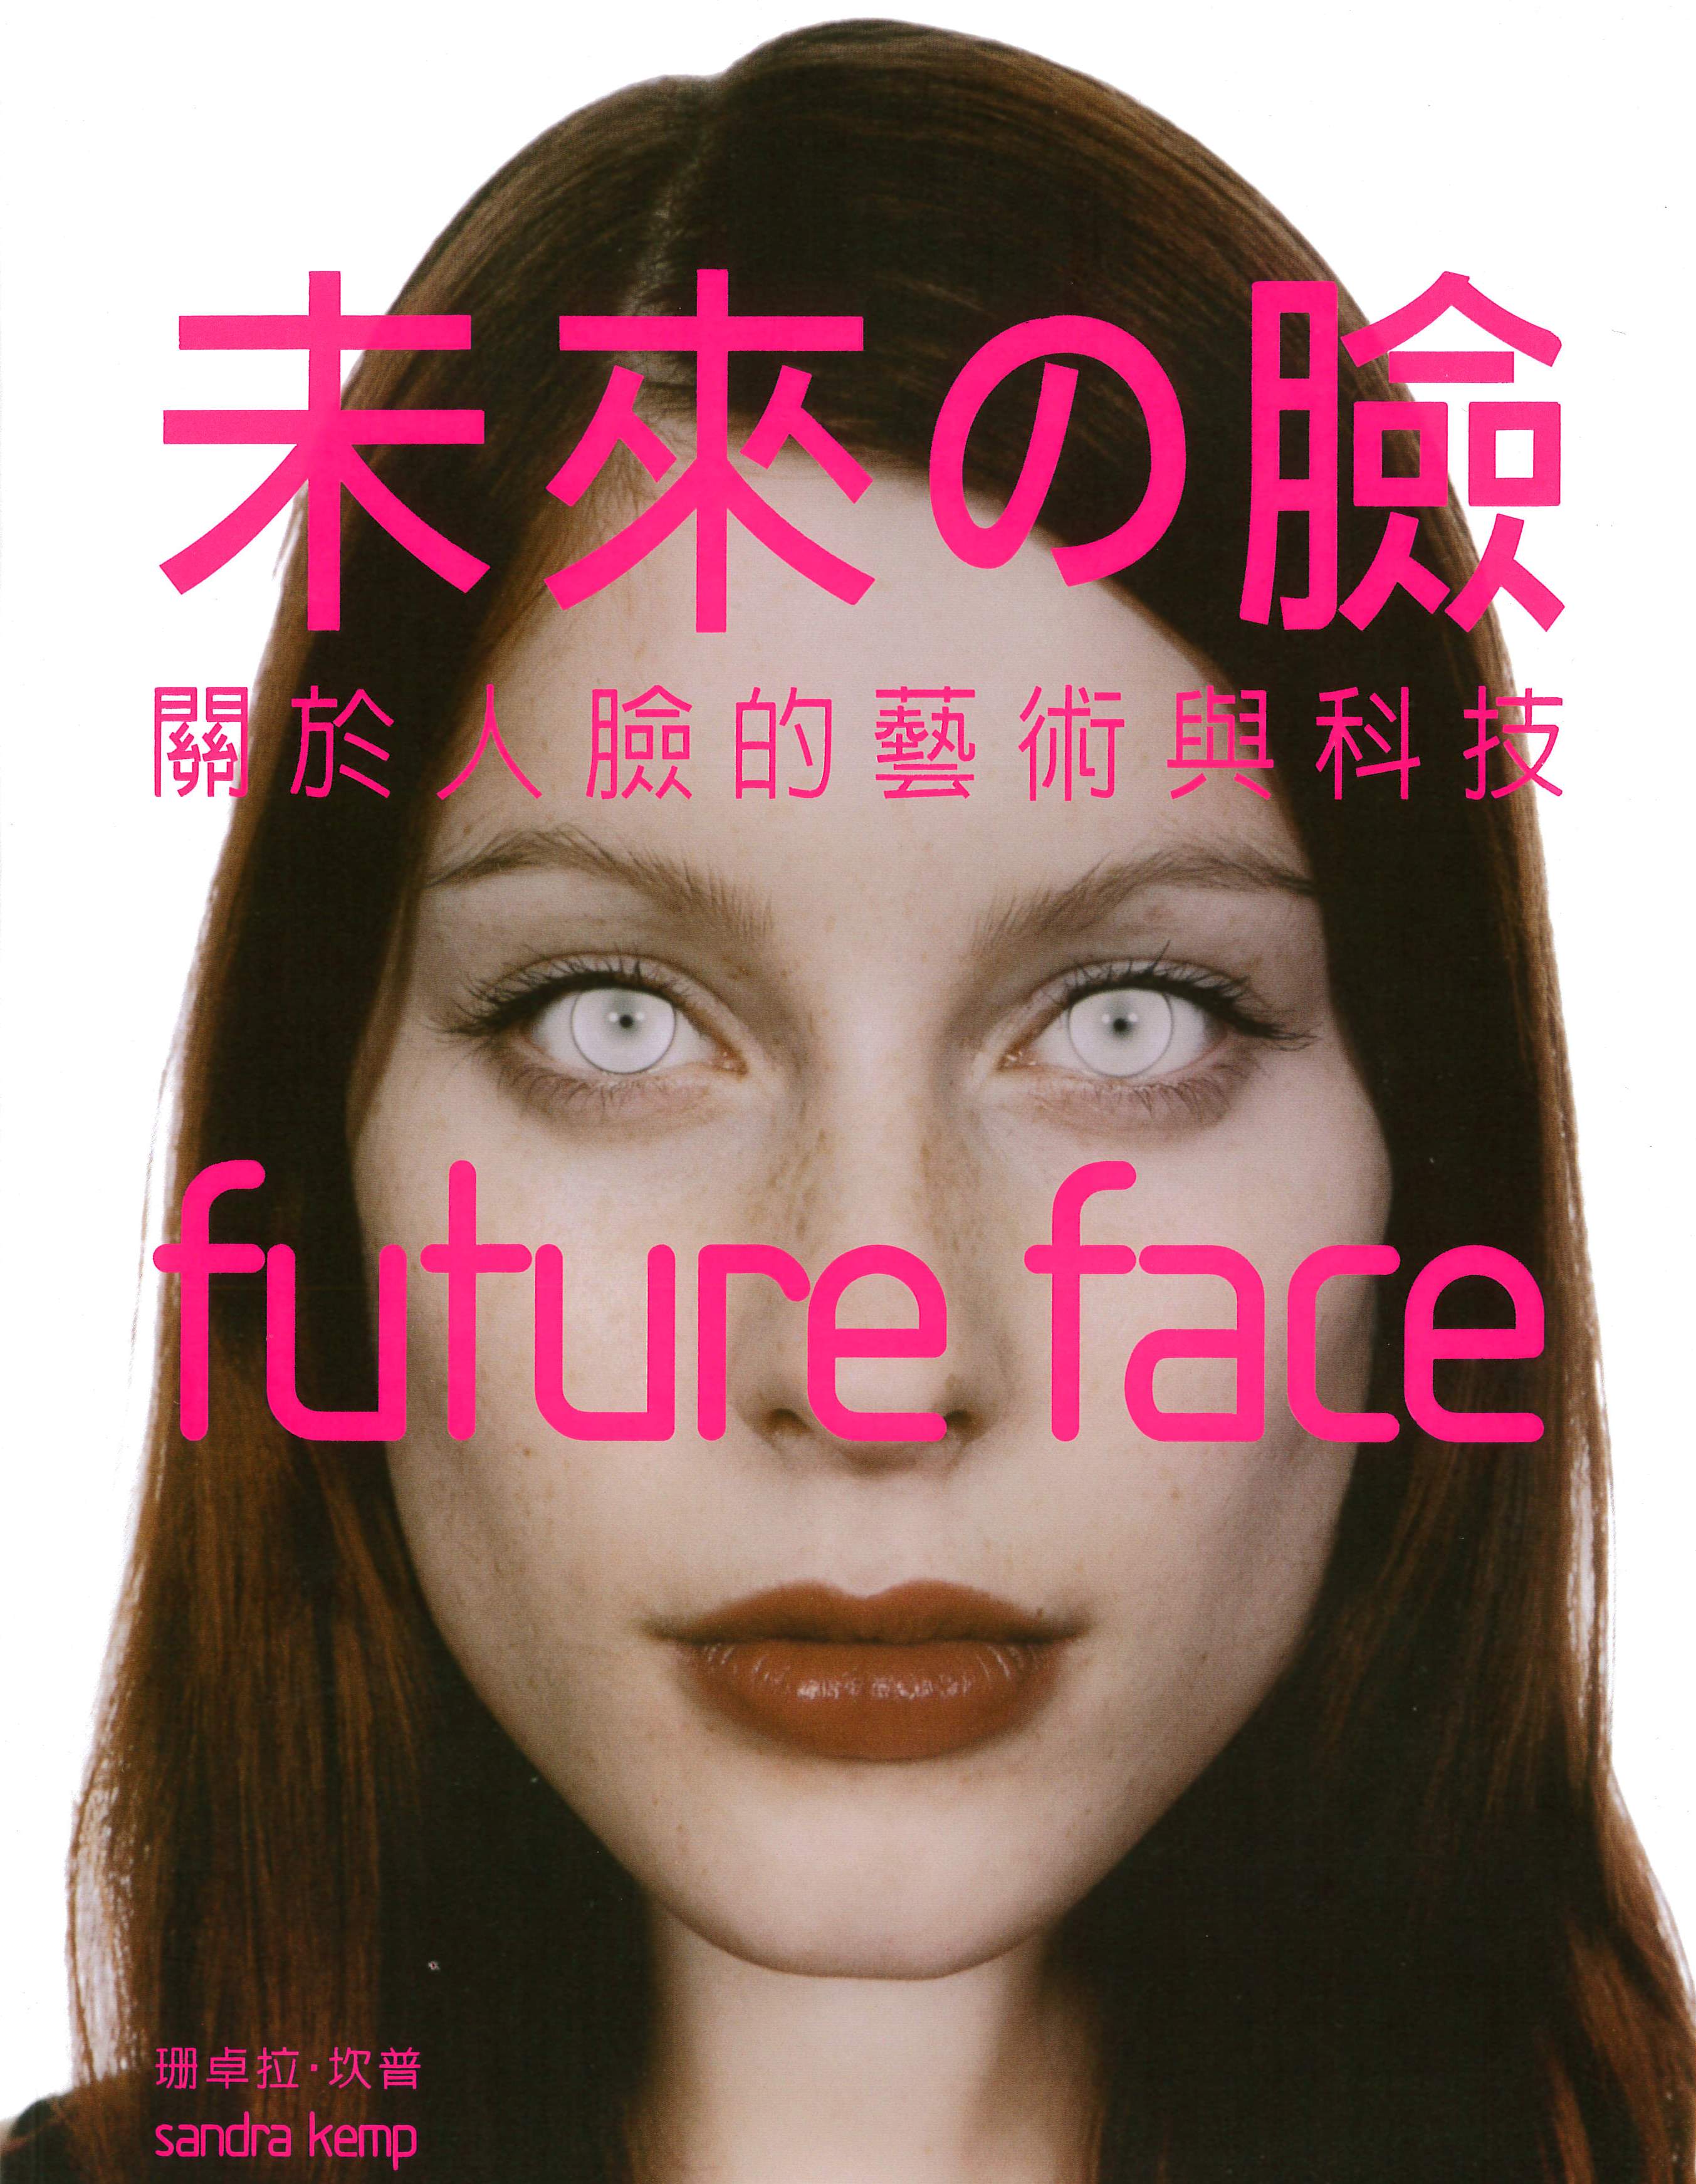 Future Face: Art and Technology relating to Human Face